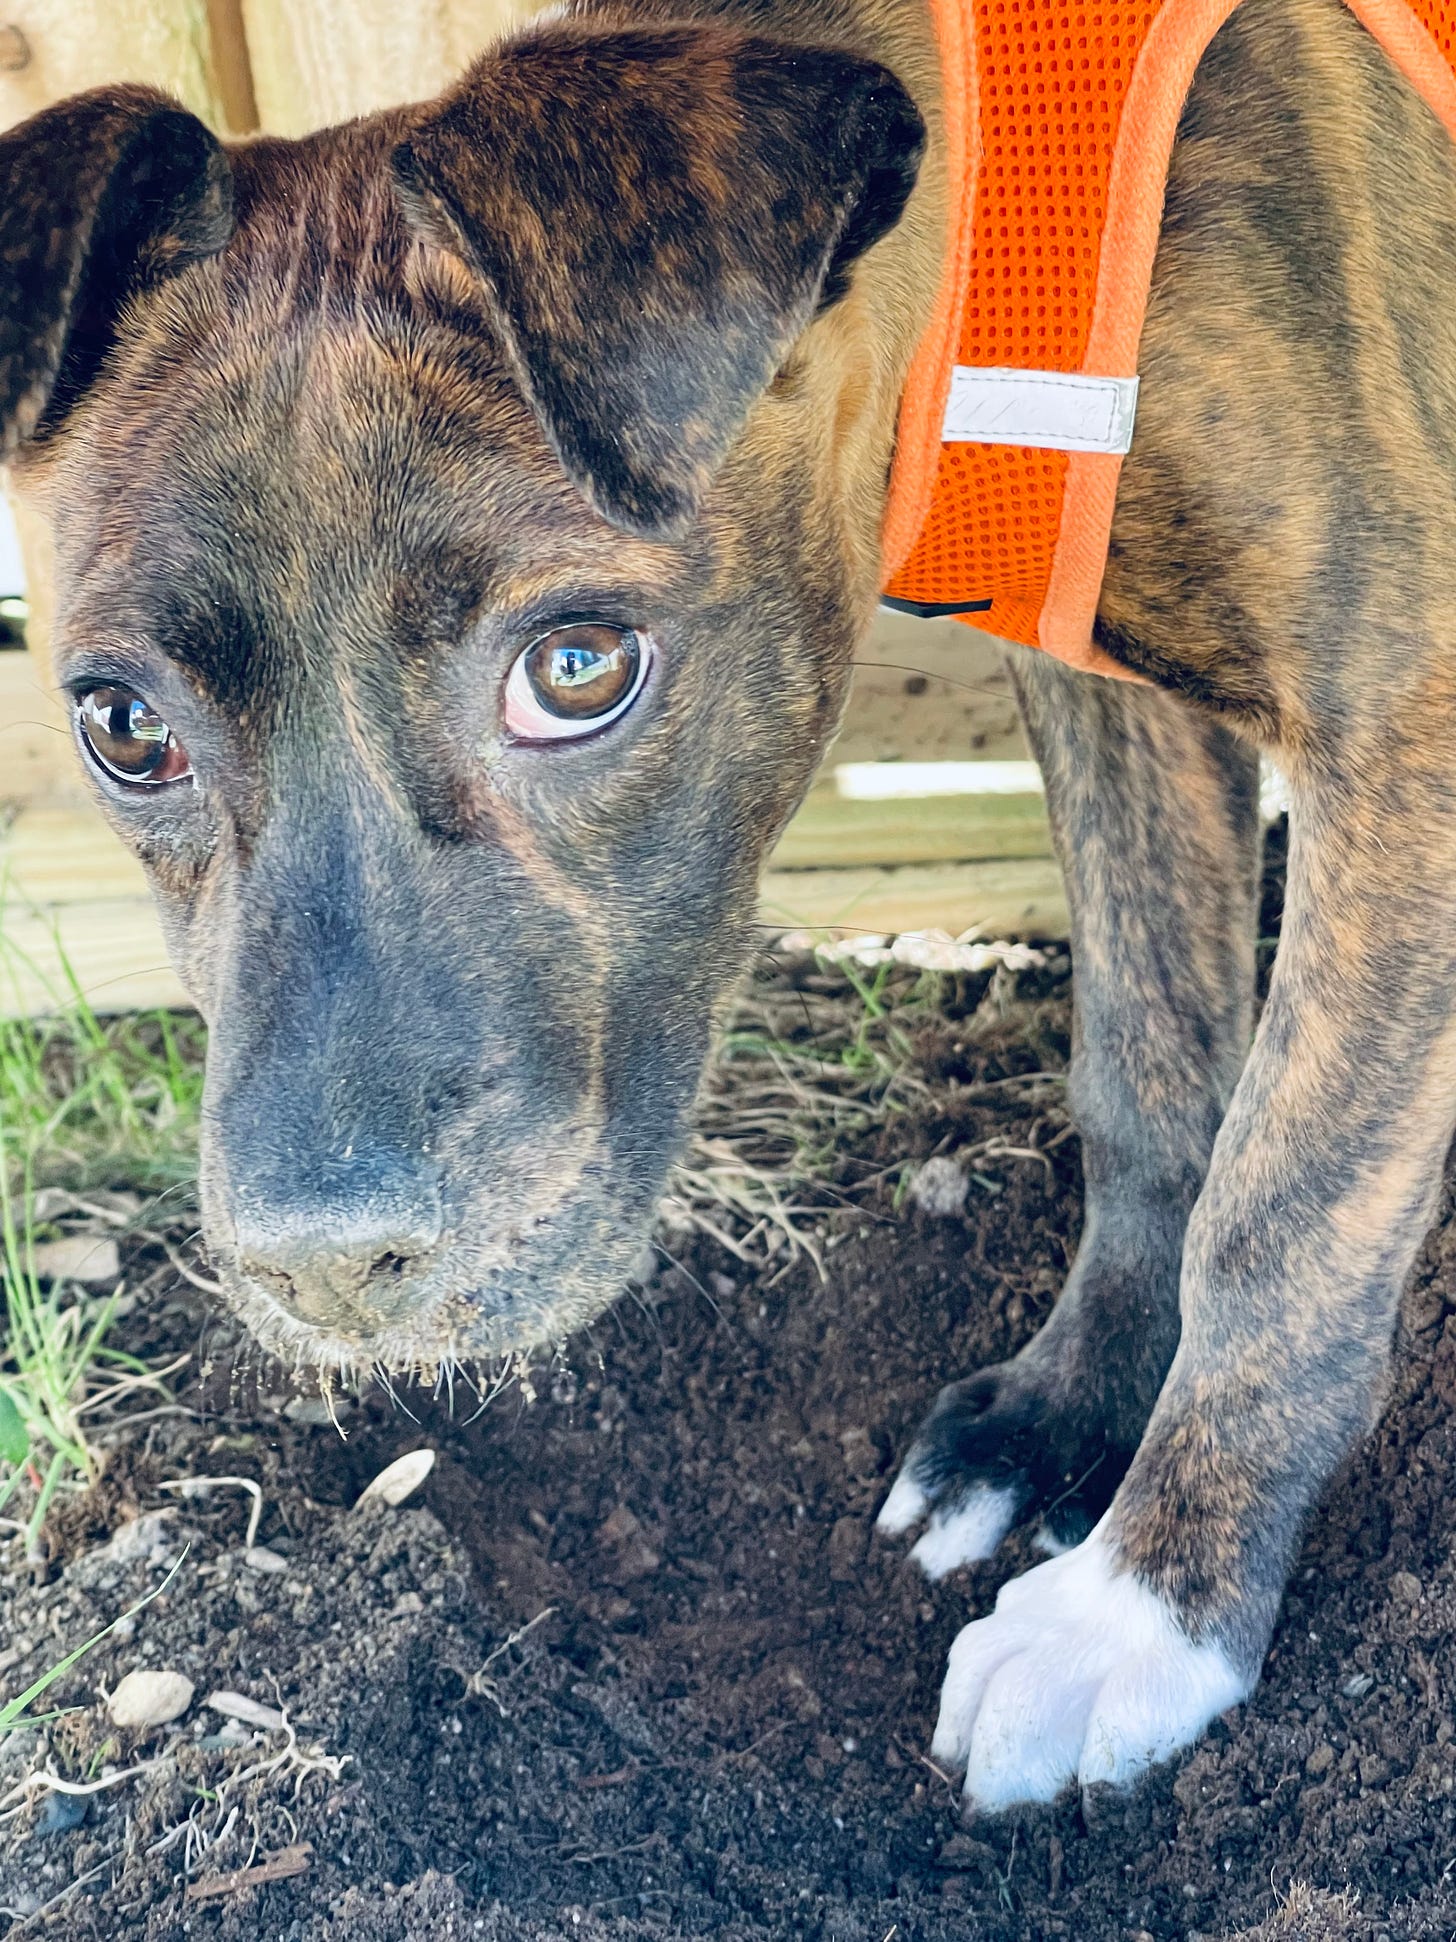 Puppy digging a hole, dirt on her face, she looks caught out